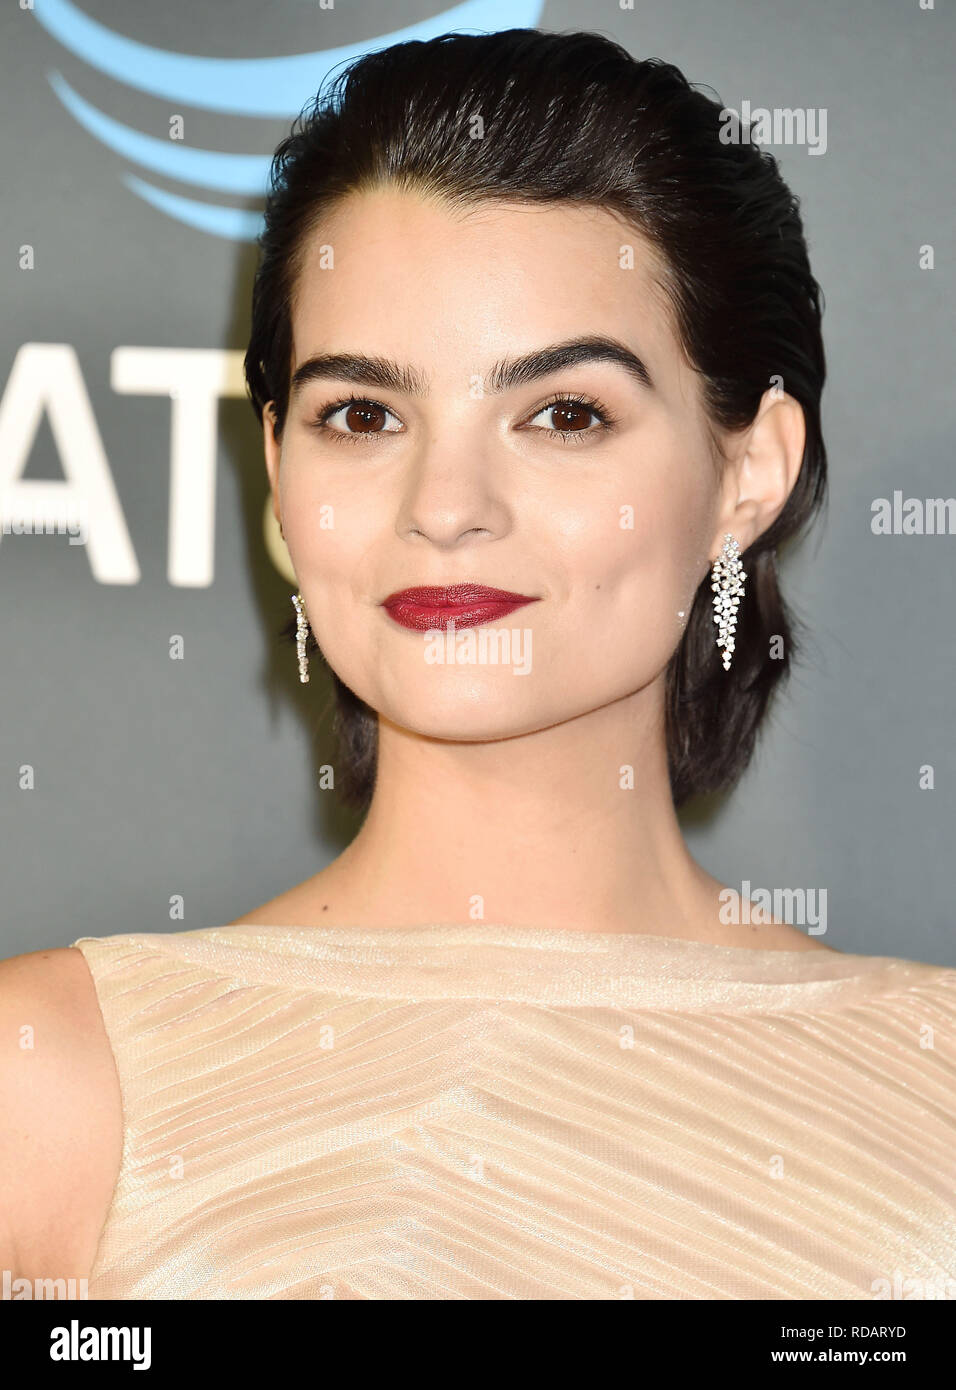 Brianna hildebrand hi-res stock photography and images - Alamy